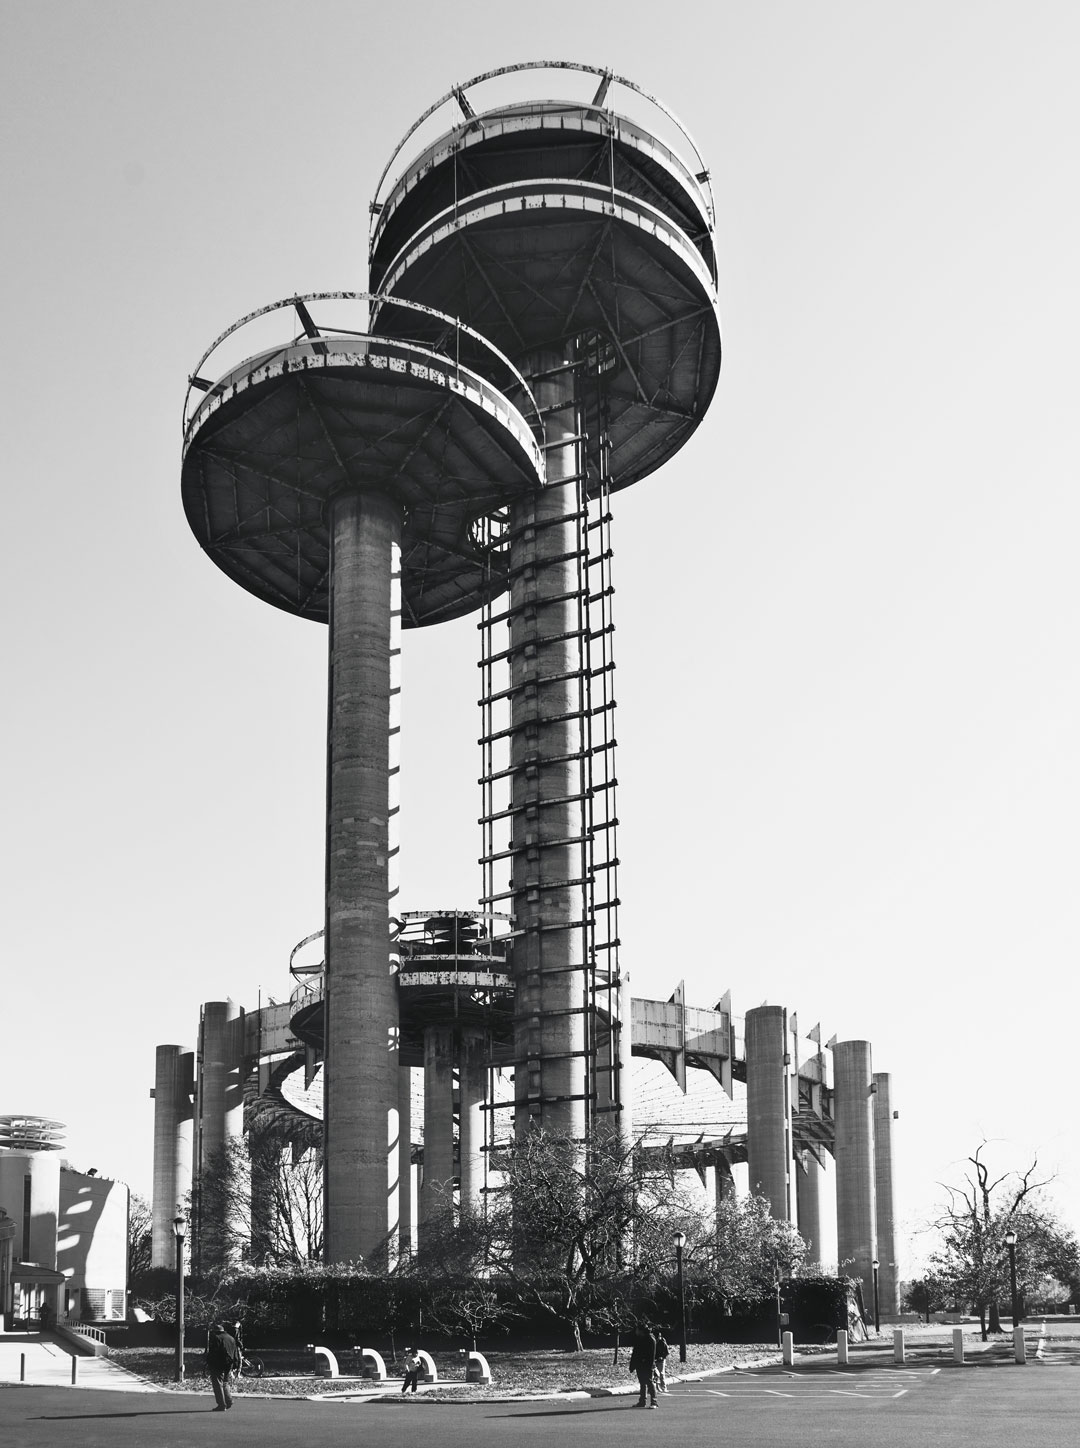 North view of the New York State Pavilion by Philip Johnson and Richard Foster, New York, 1964, with the observation towers in the foreground. Photo by Ezra Stoller